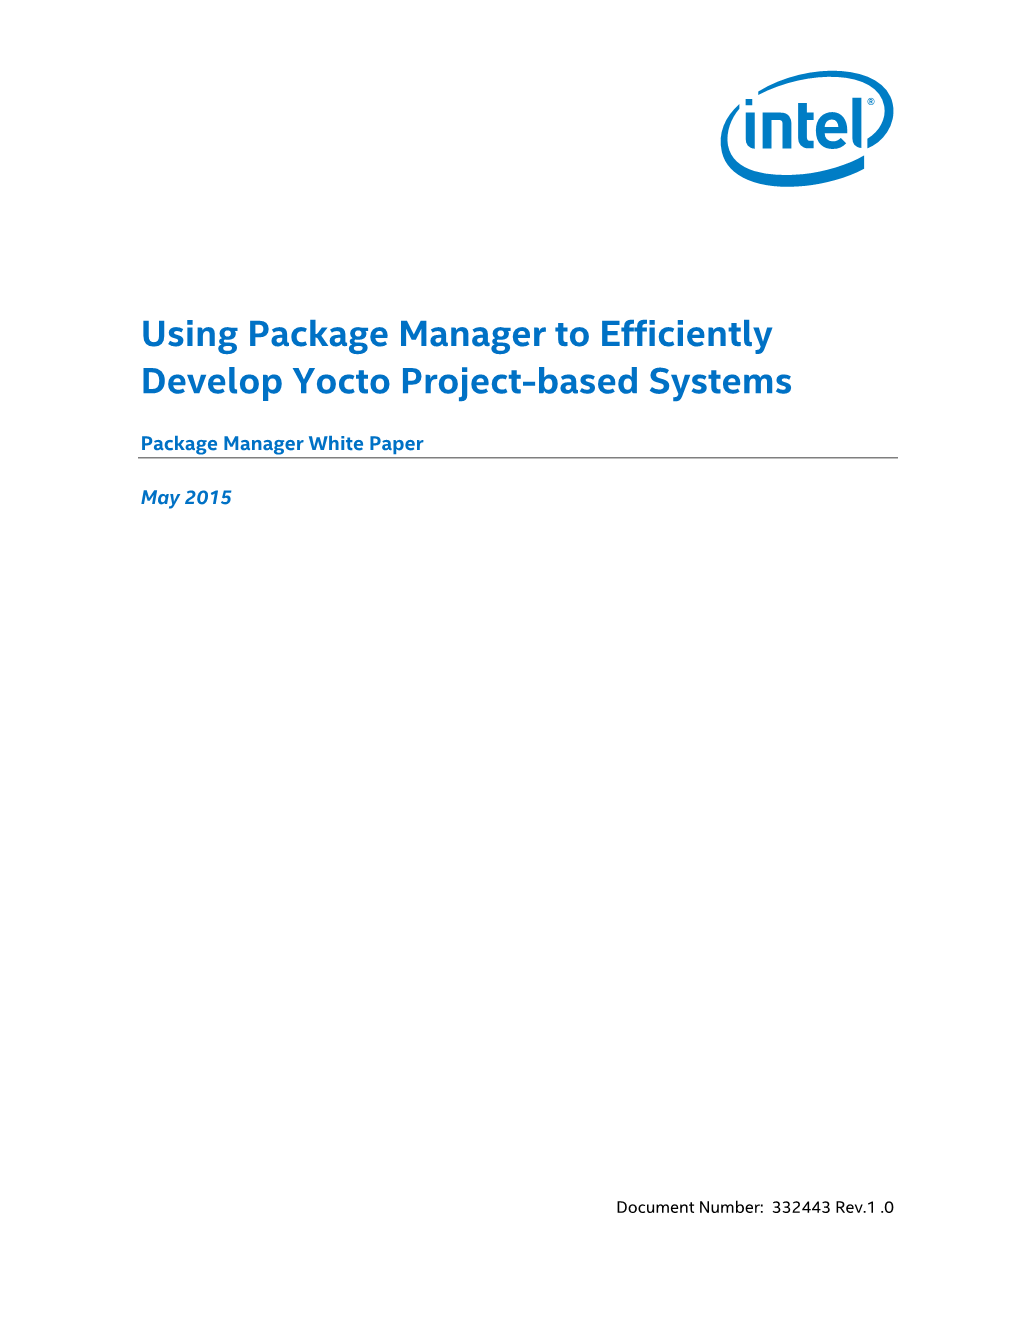 Using Package Manager to Efficiently Develop Yocto Project-Based Systems